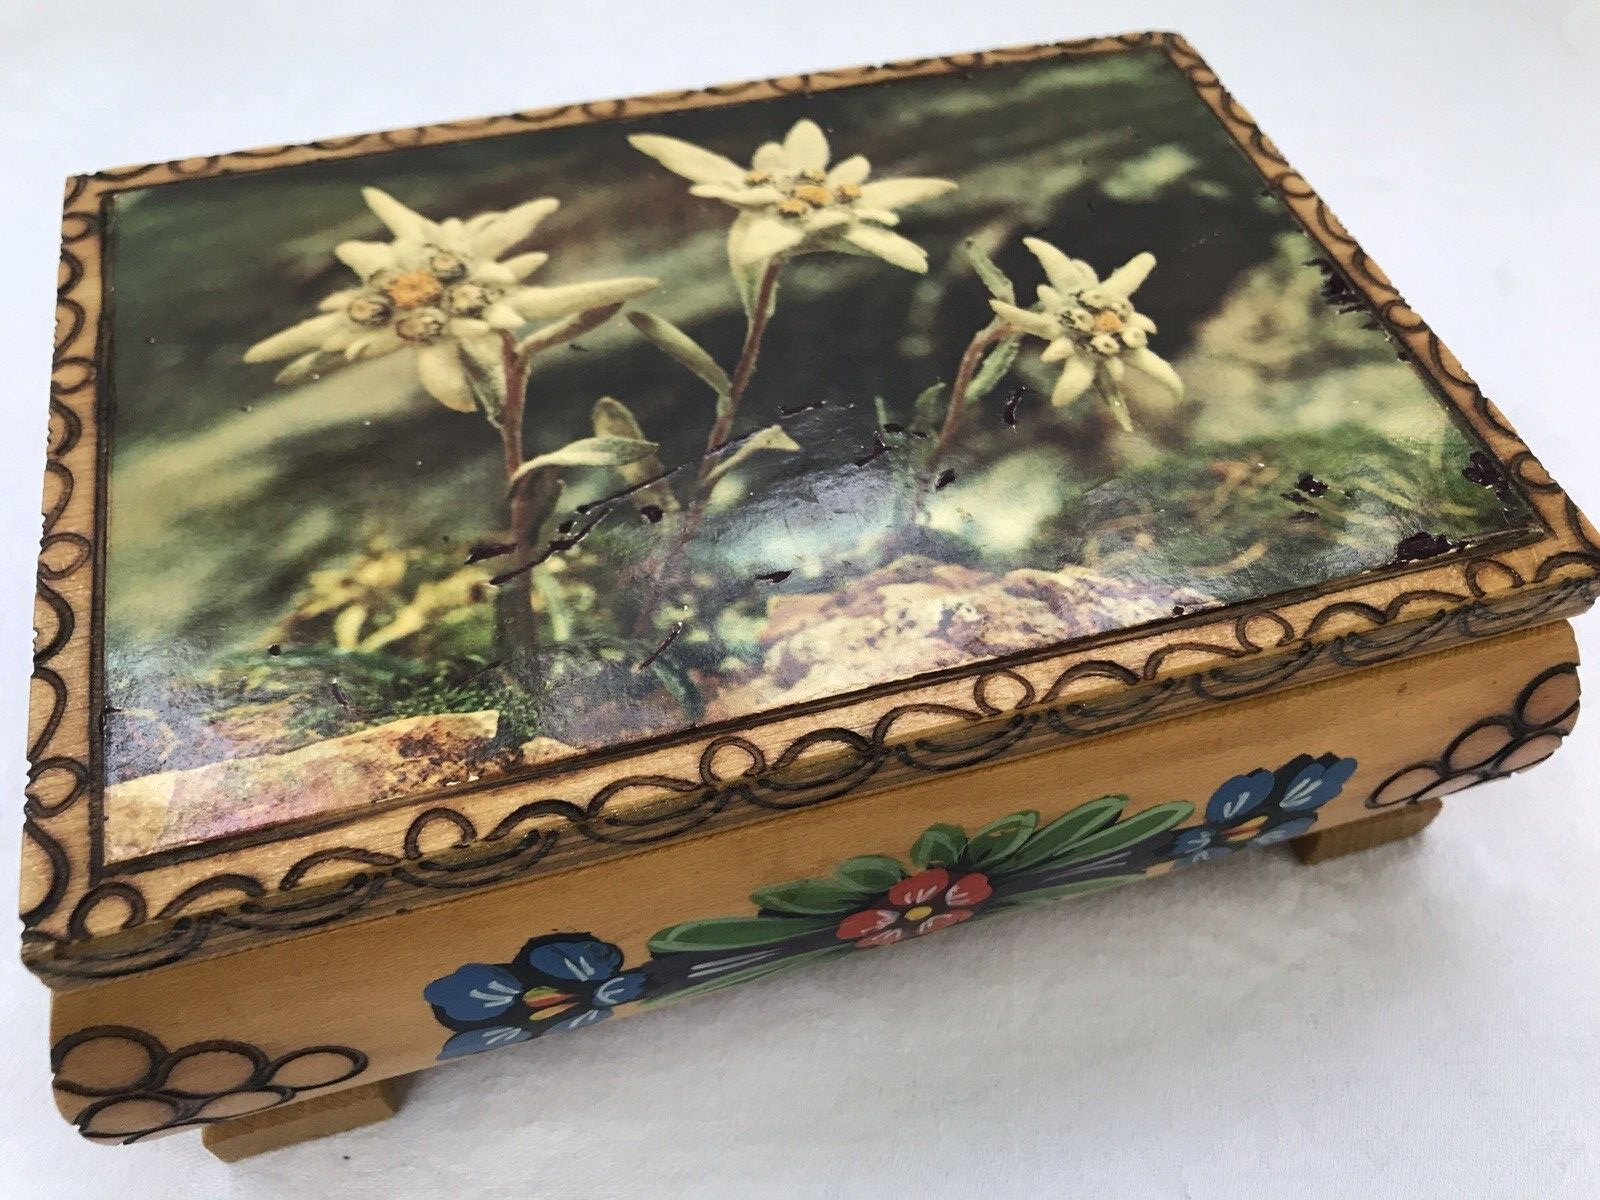 Reuge Vintage Music Box “Edelweiss” Hand Painted Wood Made in Austria